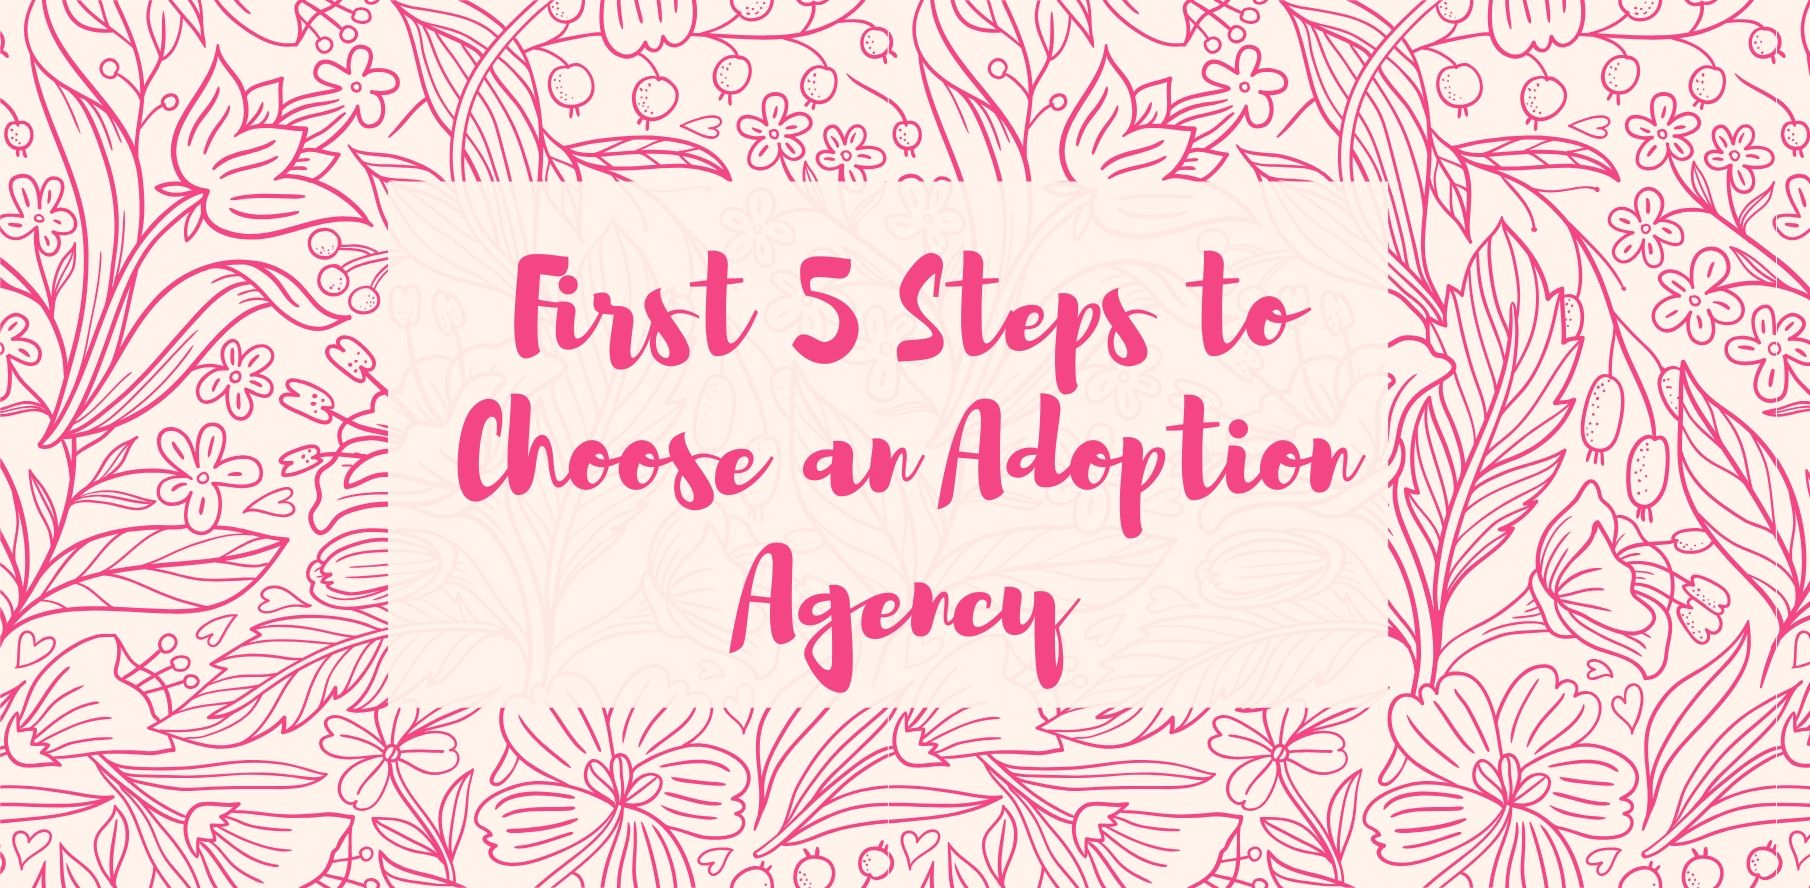 steps to choose an adoption agency